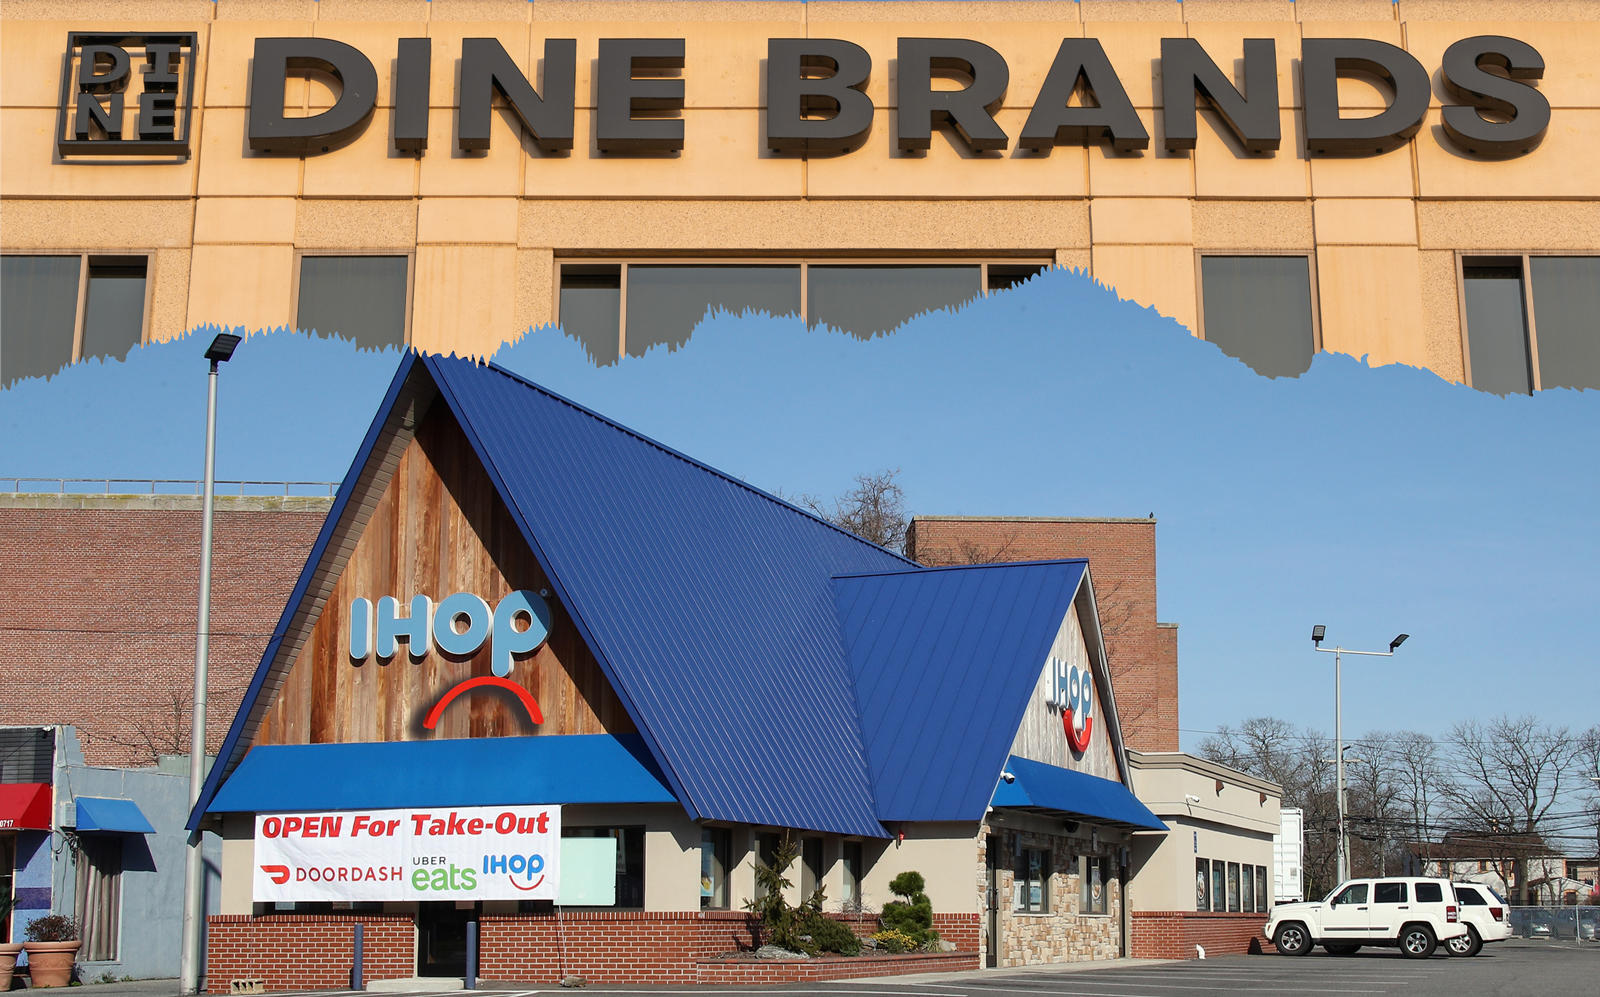 Up to 100 IHOP restaurants could close, said parent company Dine Brands Global, after third-quarter sales fell 19 percent. (Getty)